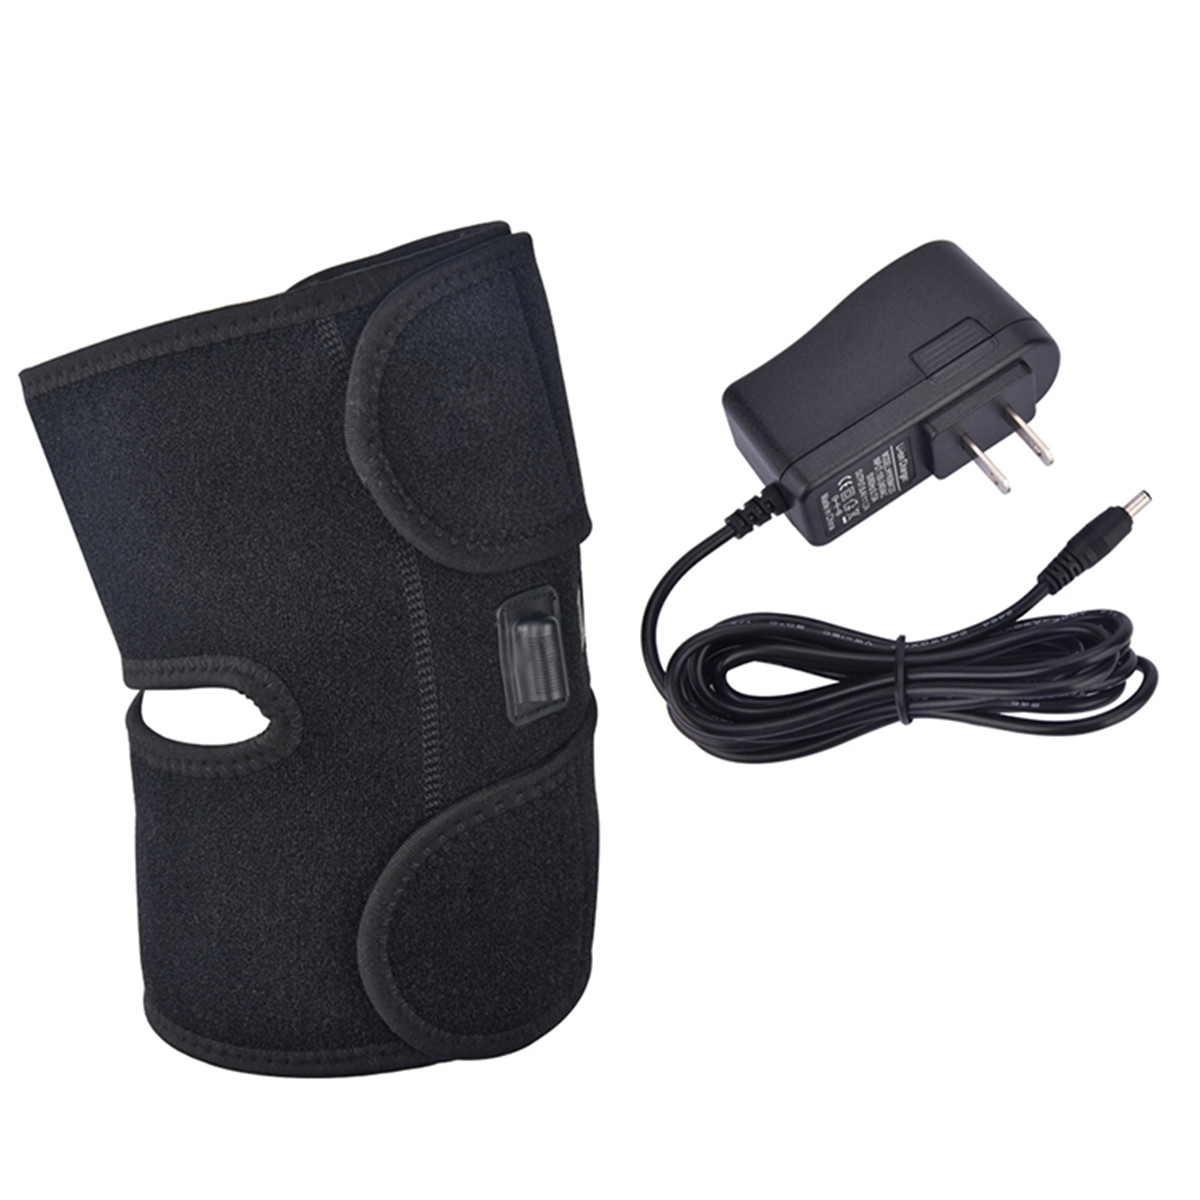 

Electric Knee Heated Pad Warmer Heating Therapy Wrap Brace Arthritis Relief Pain